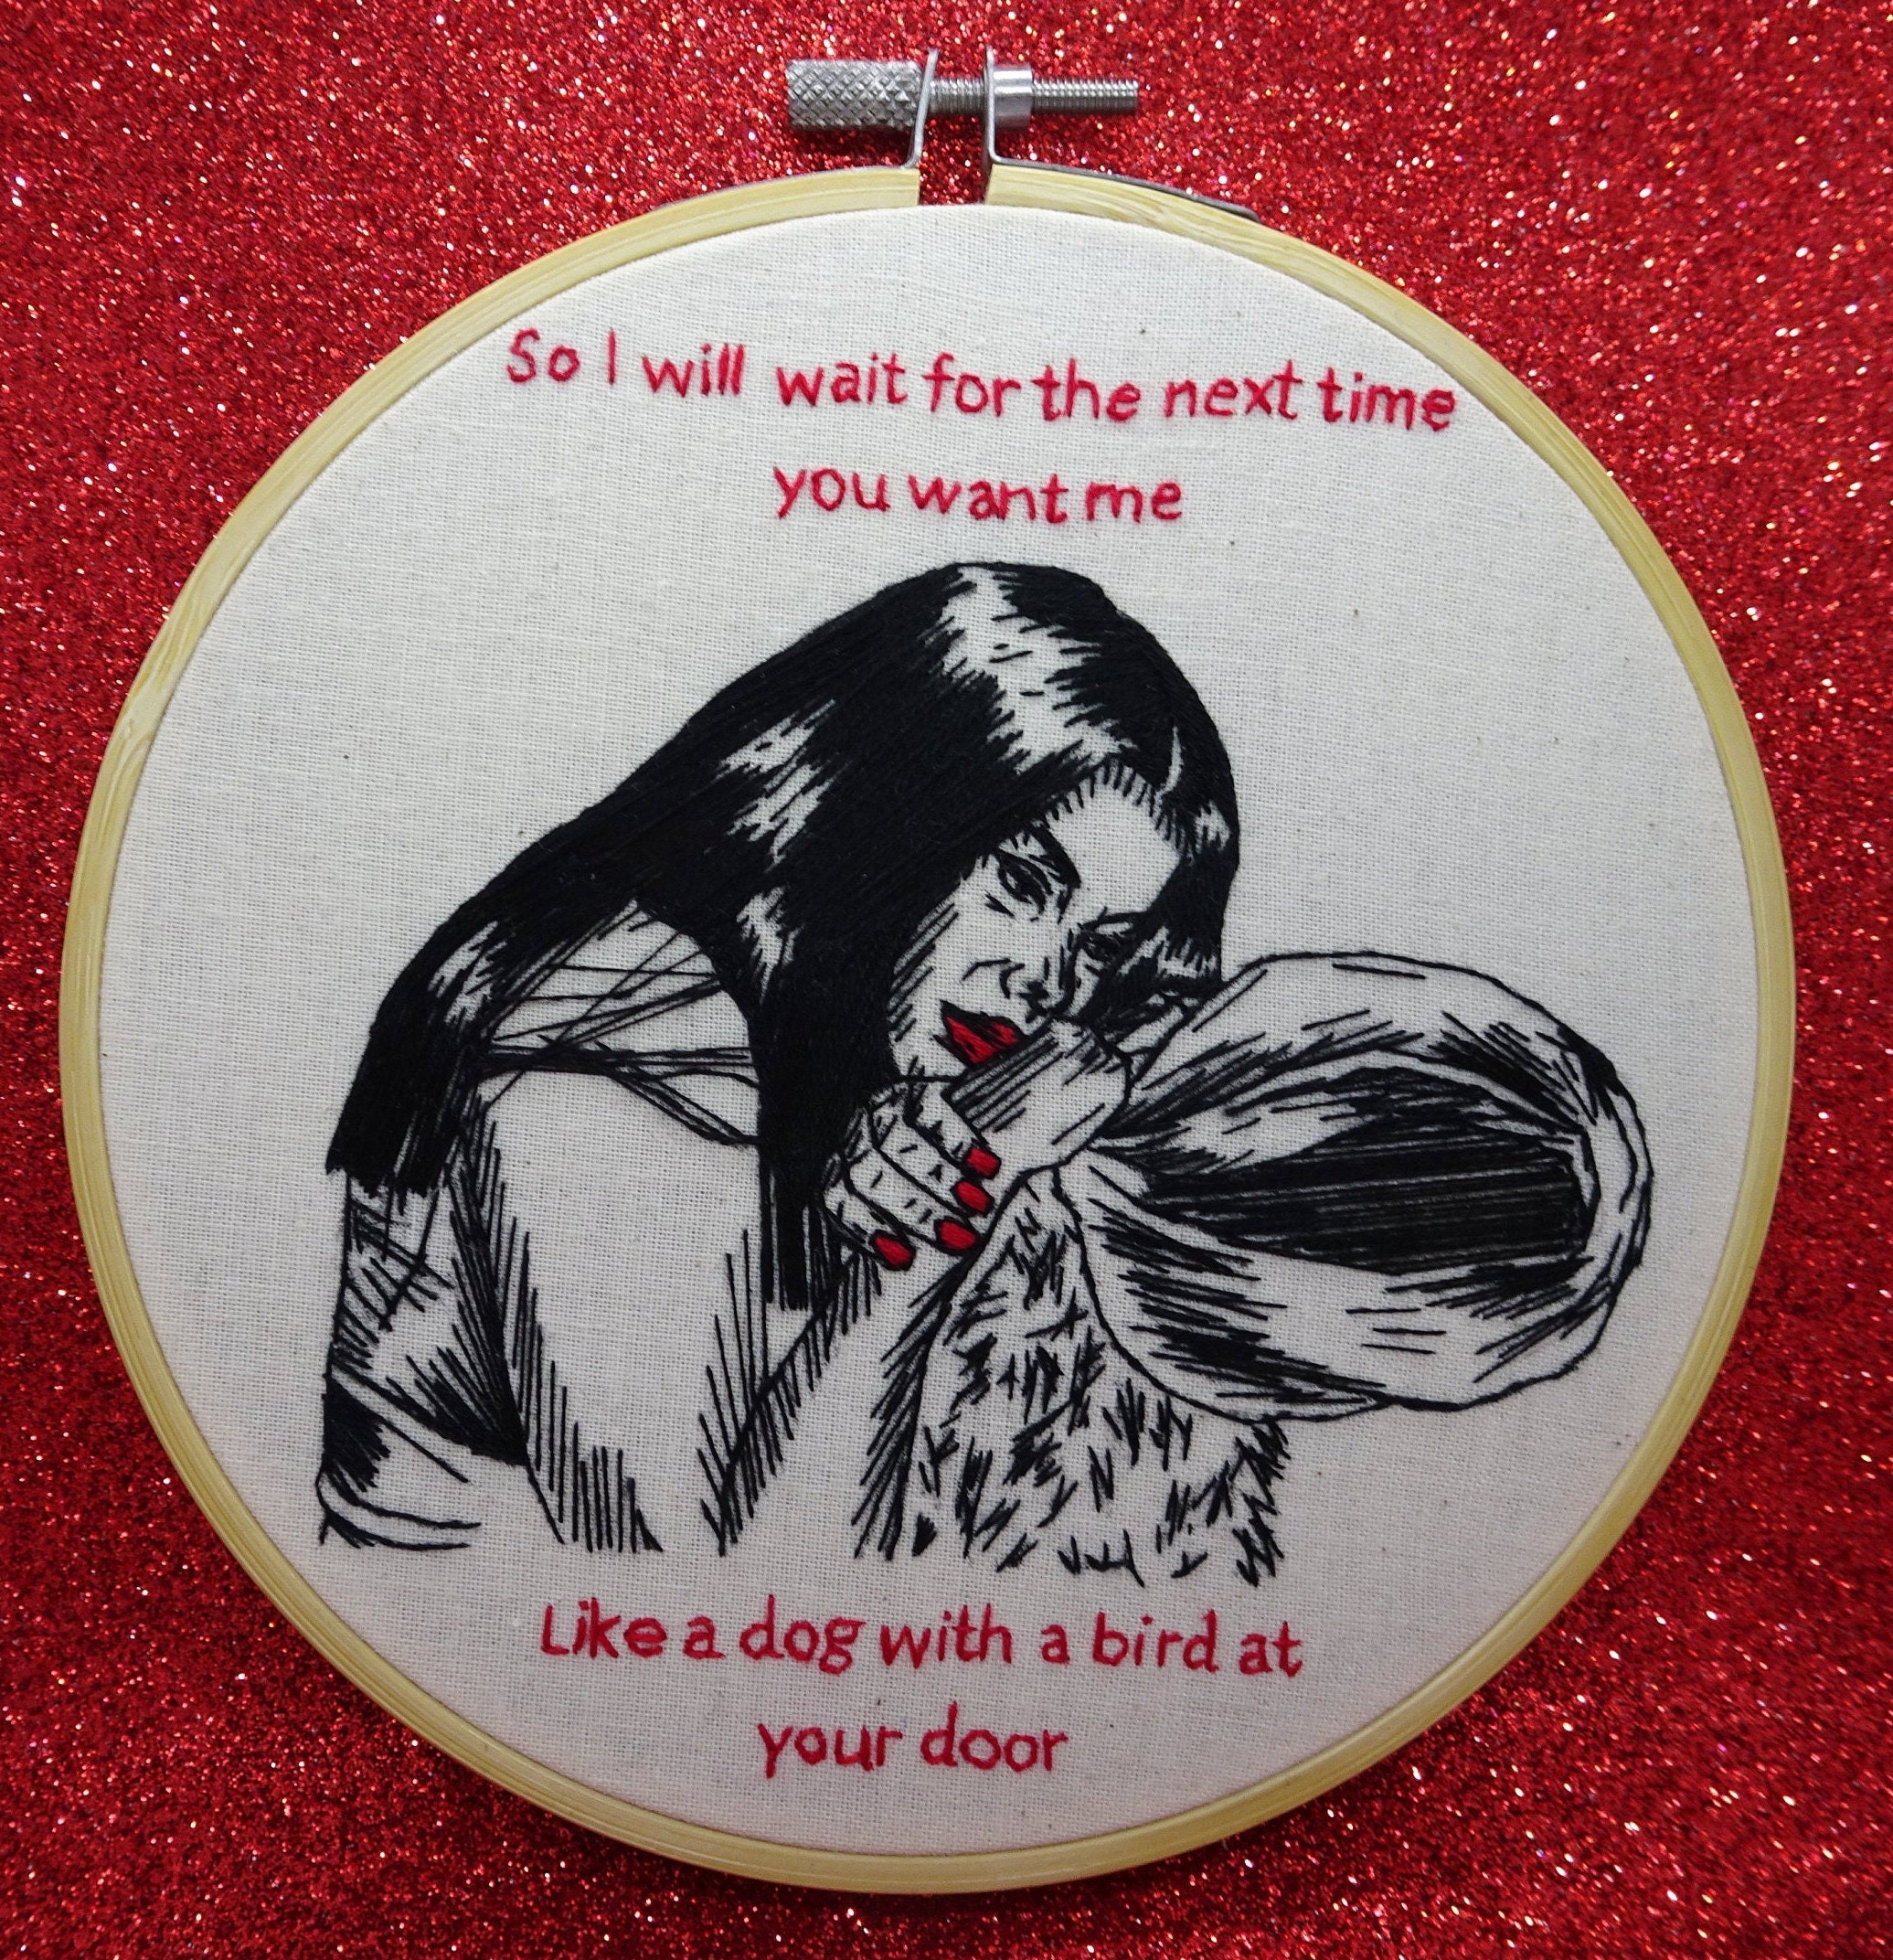 moon song 'if i could give you the moon i would give you the moon' Phoebe Bridgers lyric embroidery hoop wall art